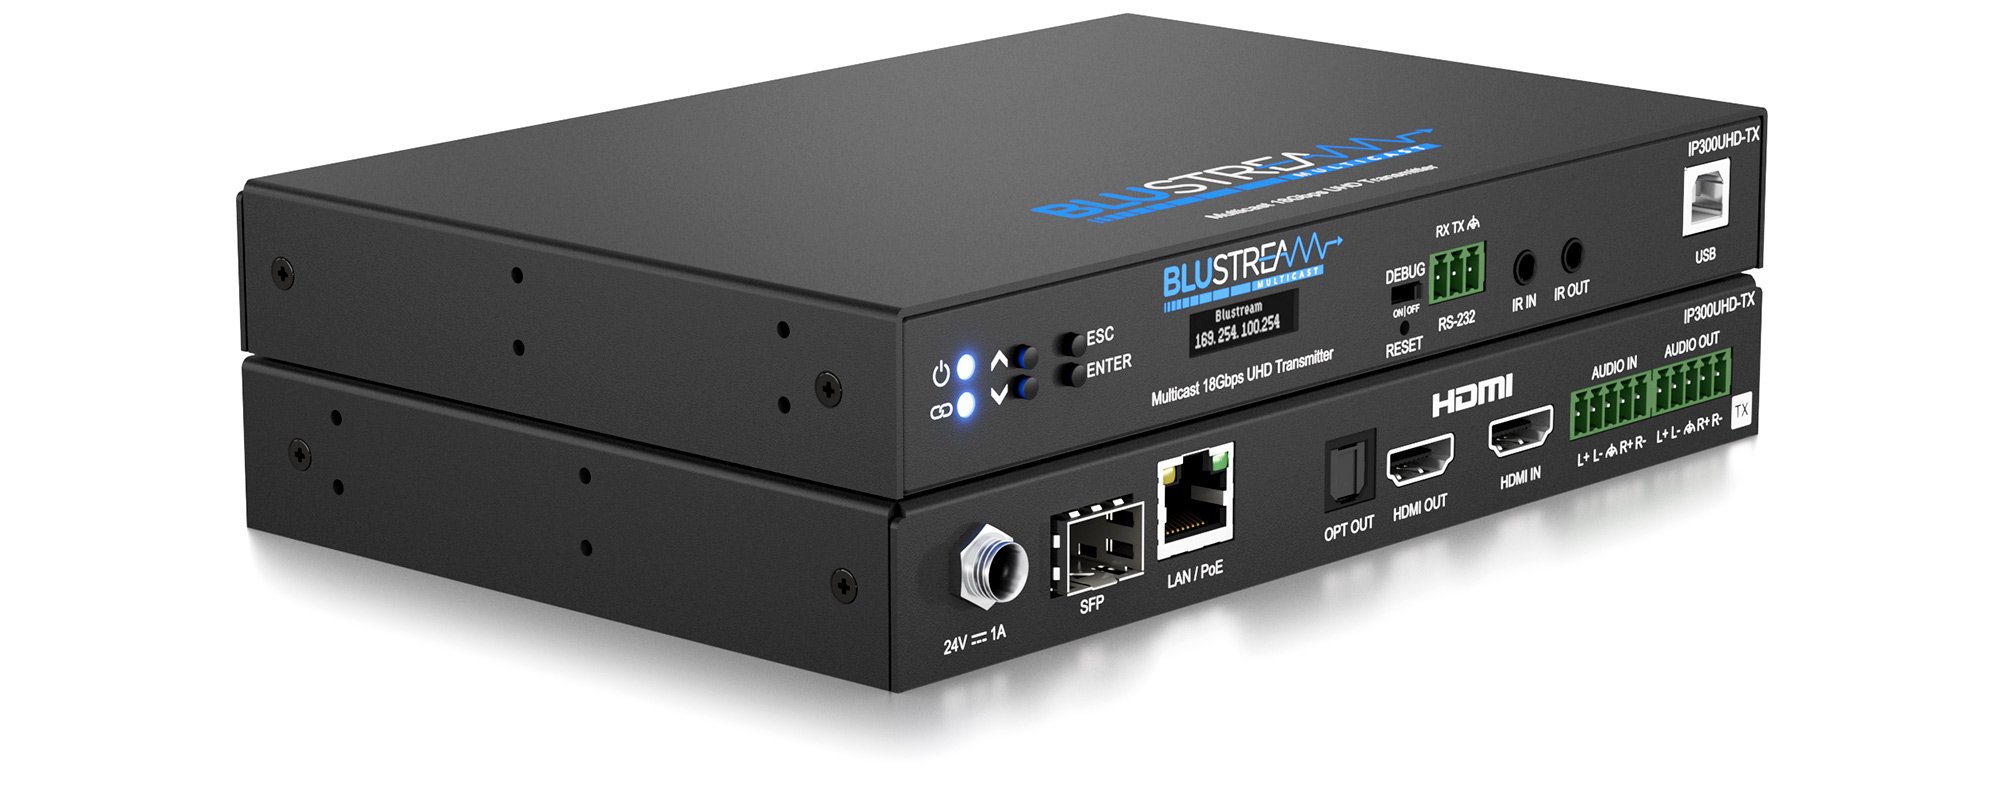 Blustream IP 18Gbps Multicast UHD Video over 1Gb Network